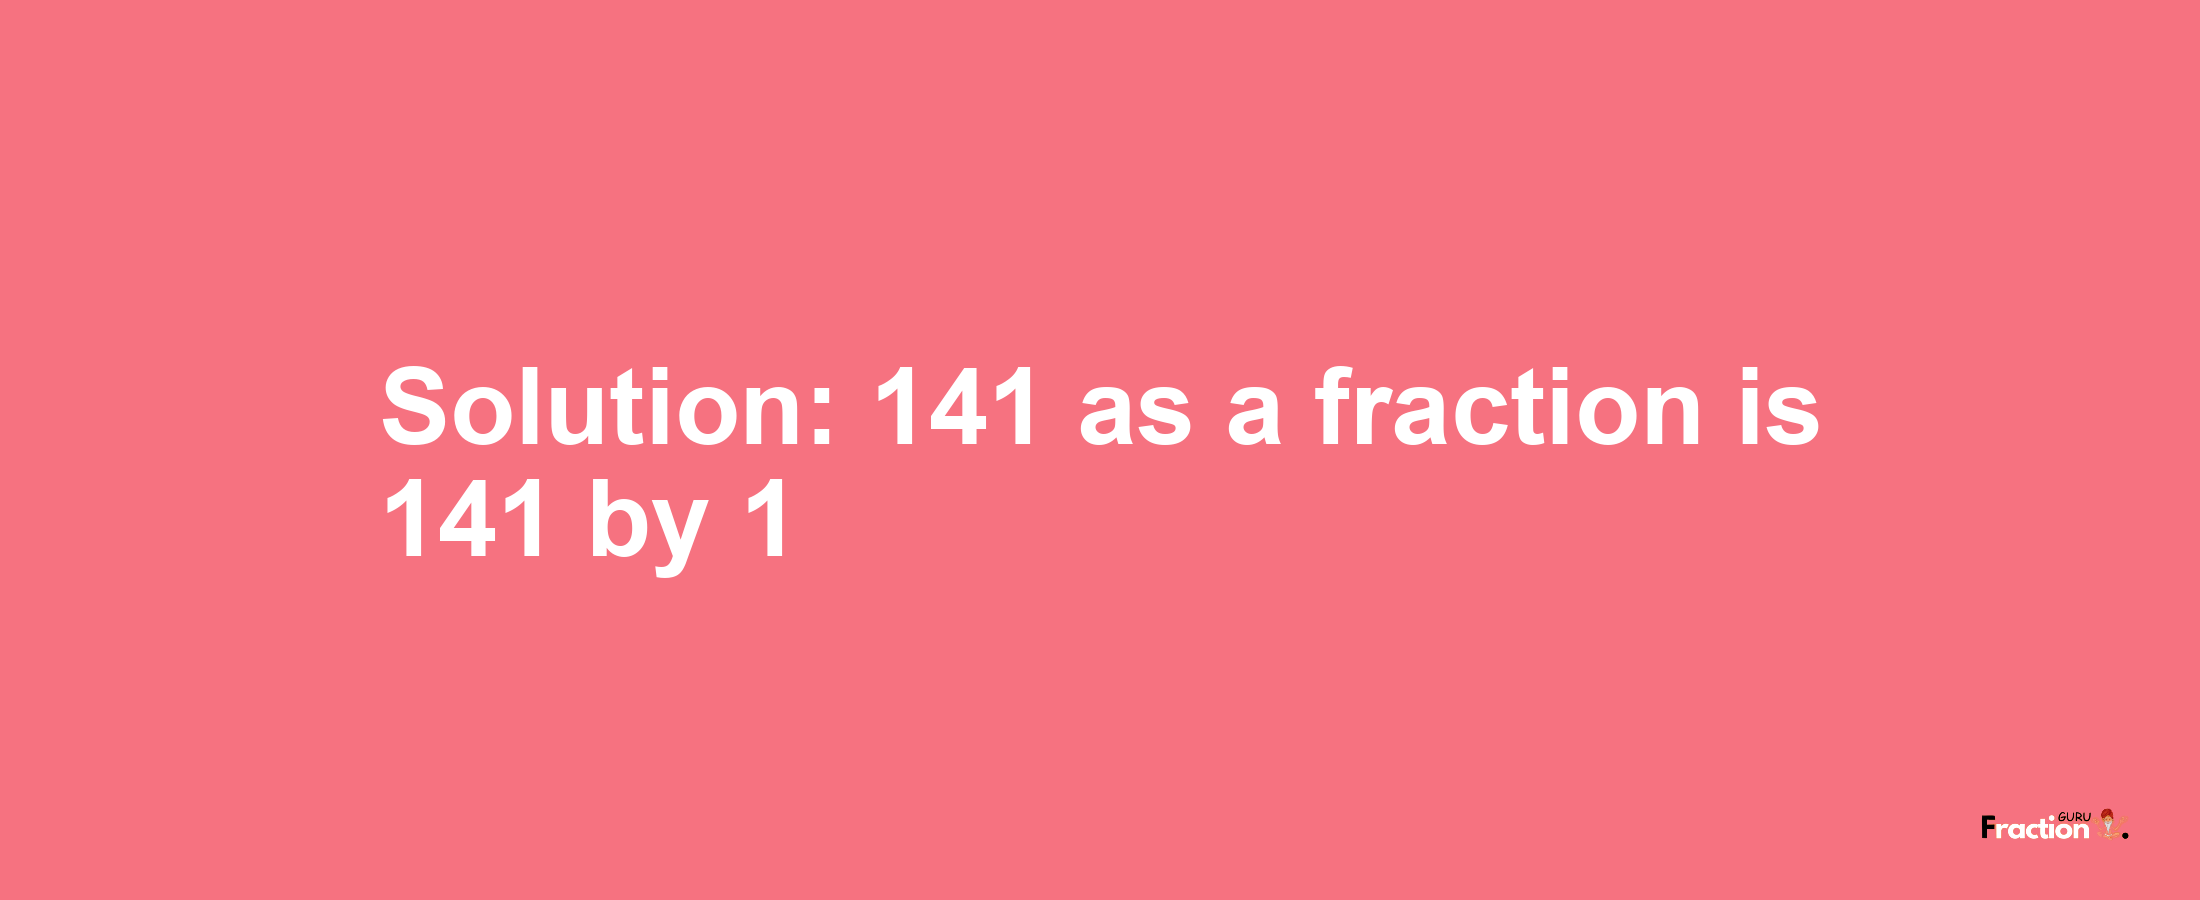 Solution:141 as a fraction is 141/1